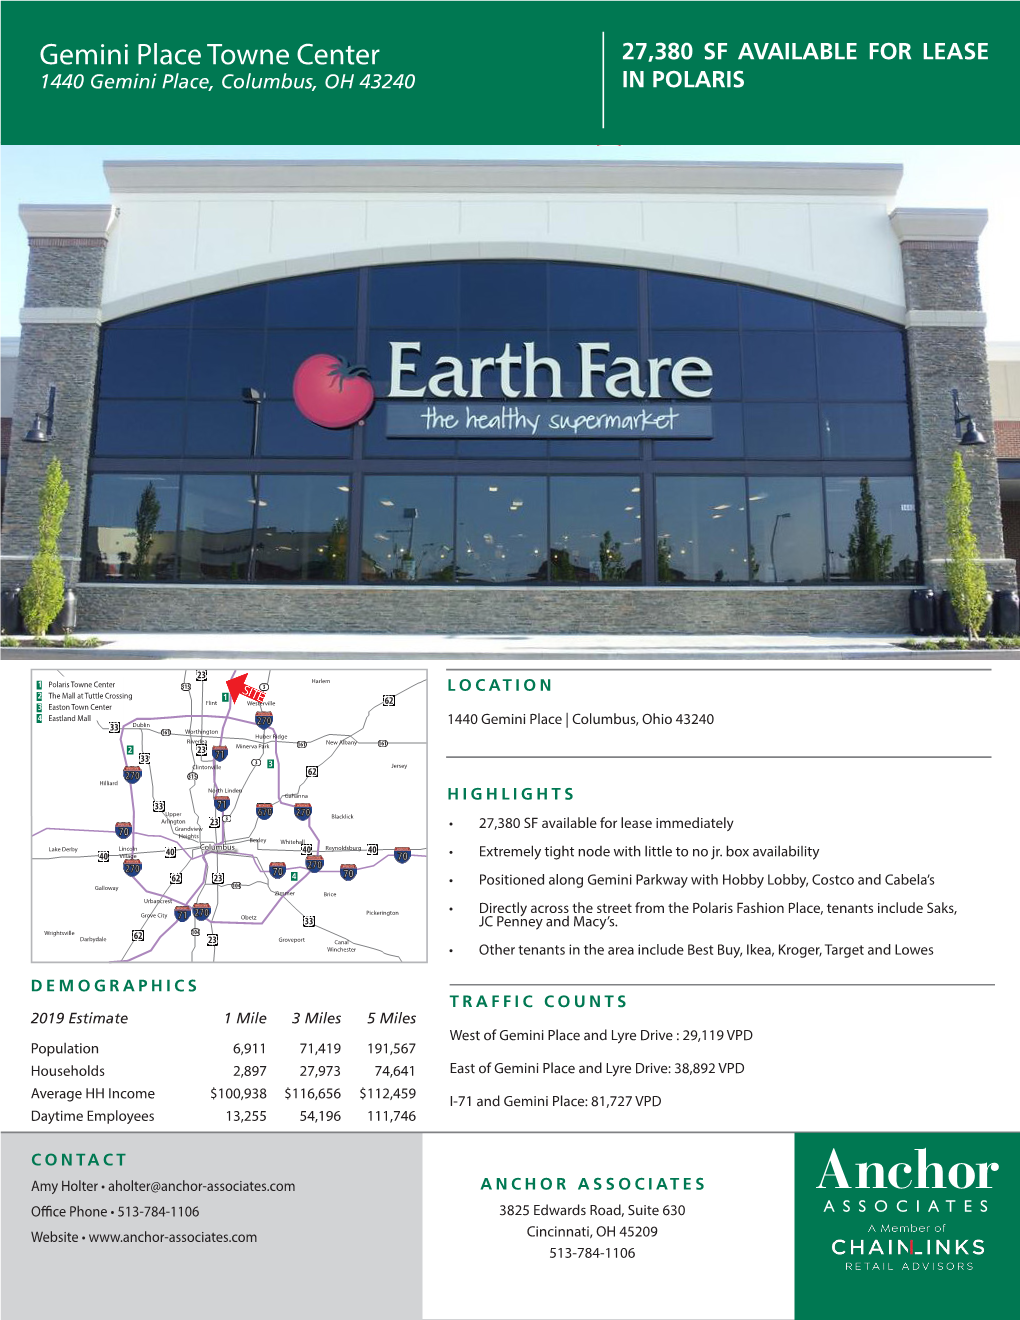 Gemini Place Towne Center 27,380 SF AVAILABLE for LEASE 1440 Gemini Place, Columbus, OH 43240 in POLARIS